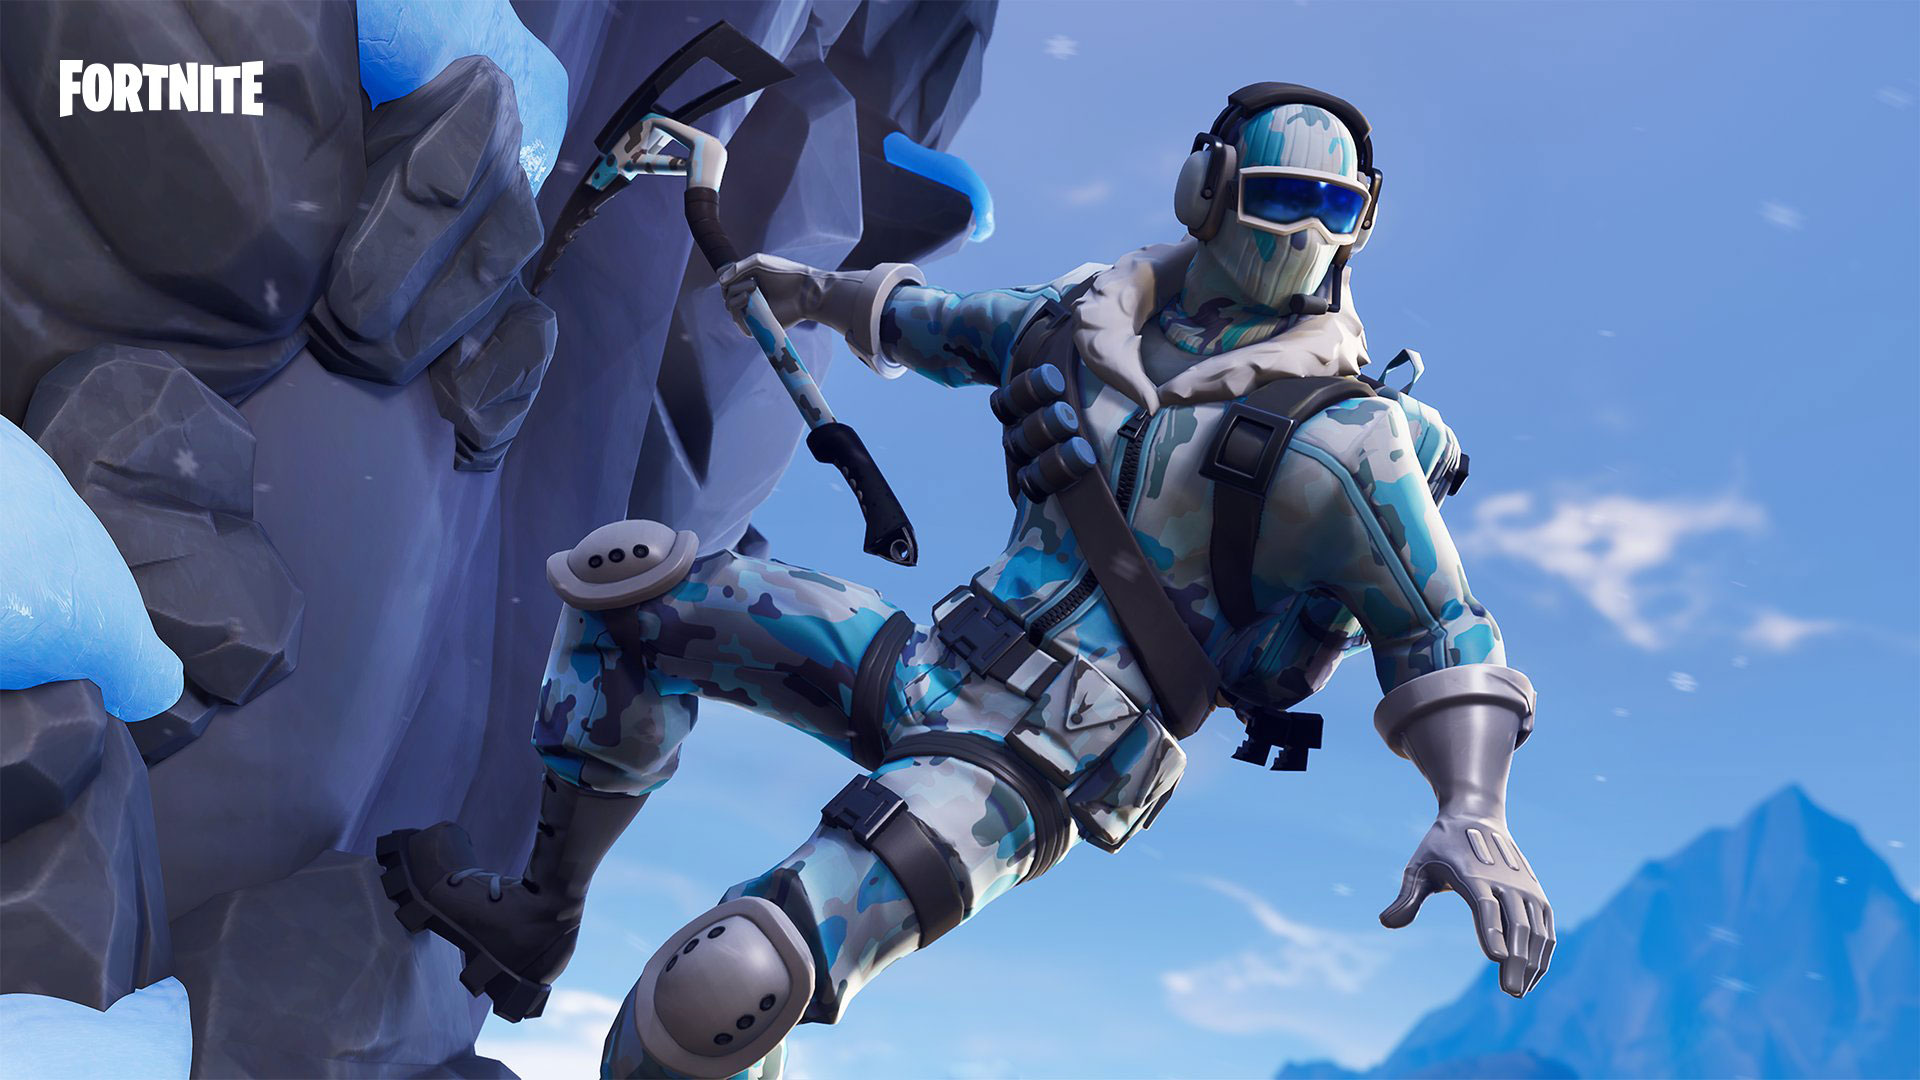 Fortnite Frostbite Skin Outfit Pngs Image Pro Game Guides